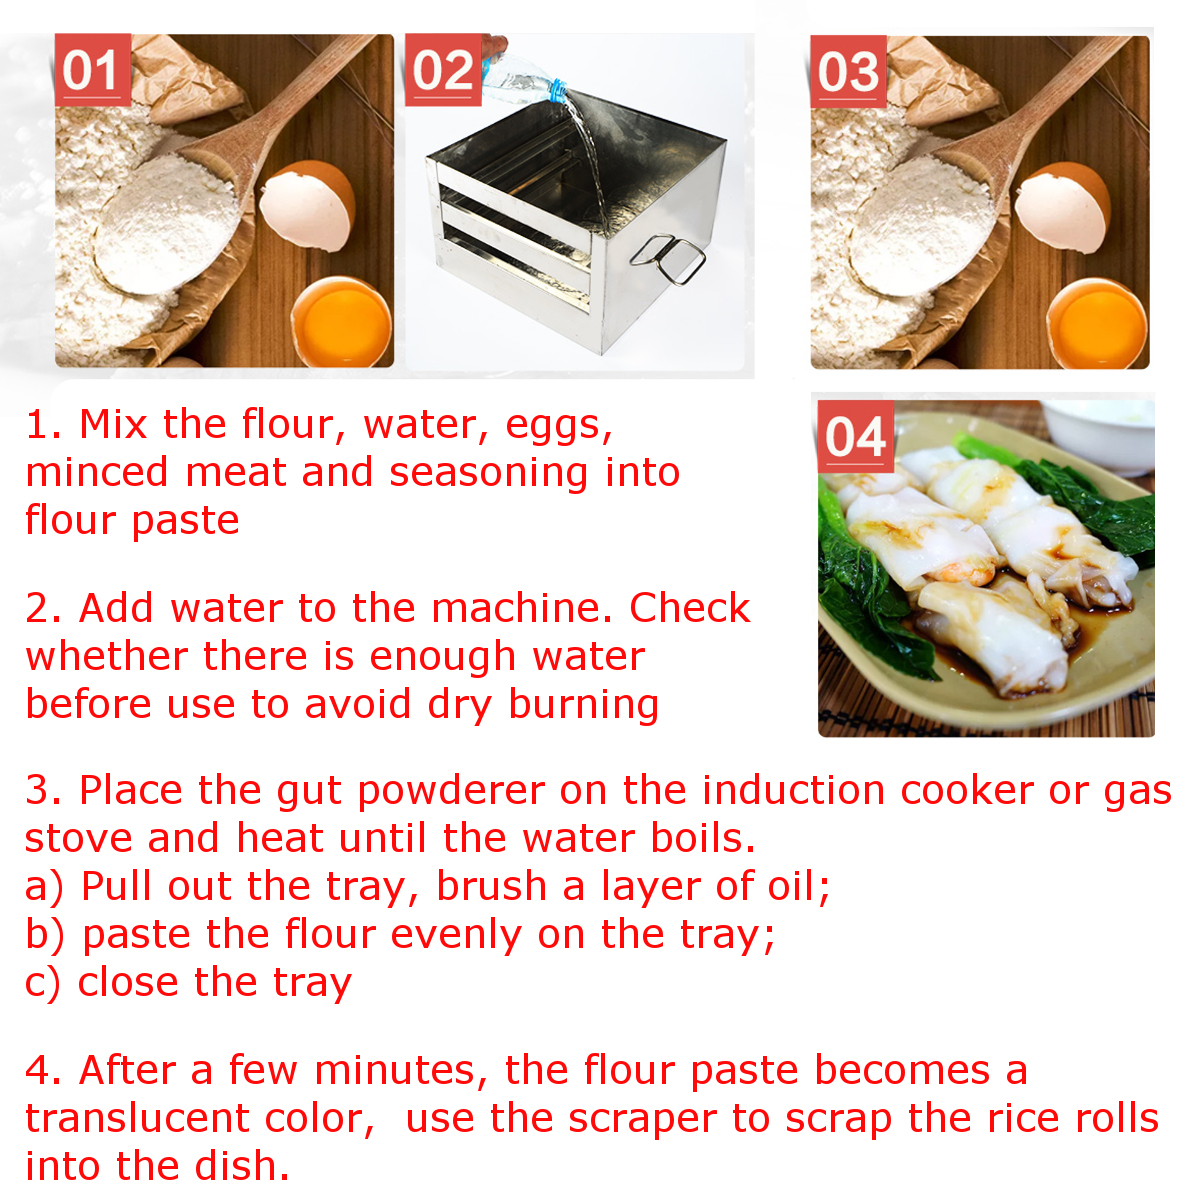 Stainless-Steel-Tray-1-Layer-Steamed-Vermicelli-Rice-Roll-Machine-Kitchen-Cooking-Steamer-Drawer-1339660-7